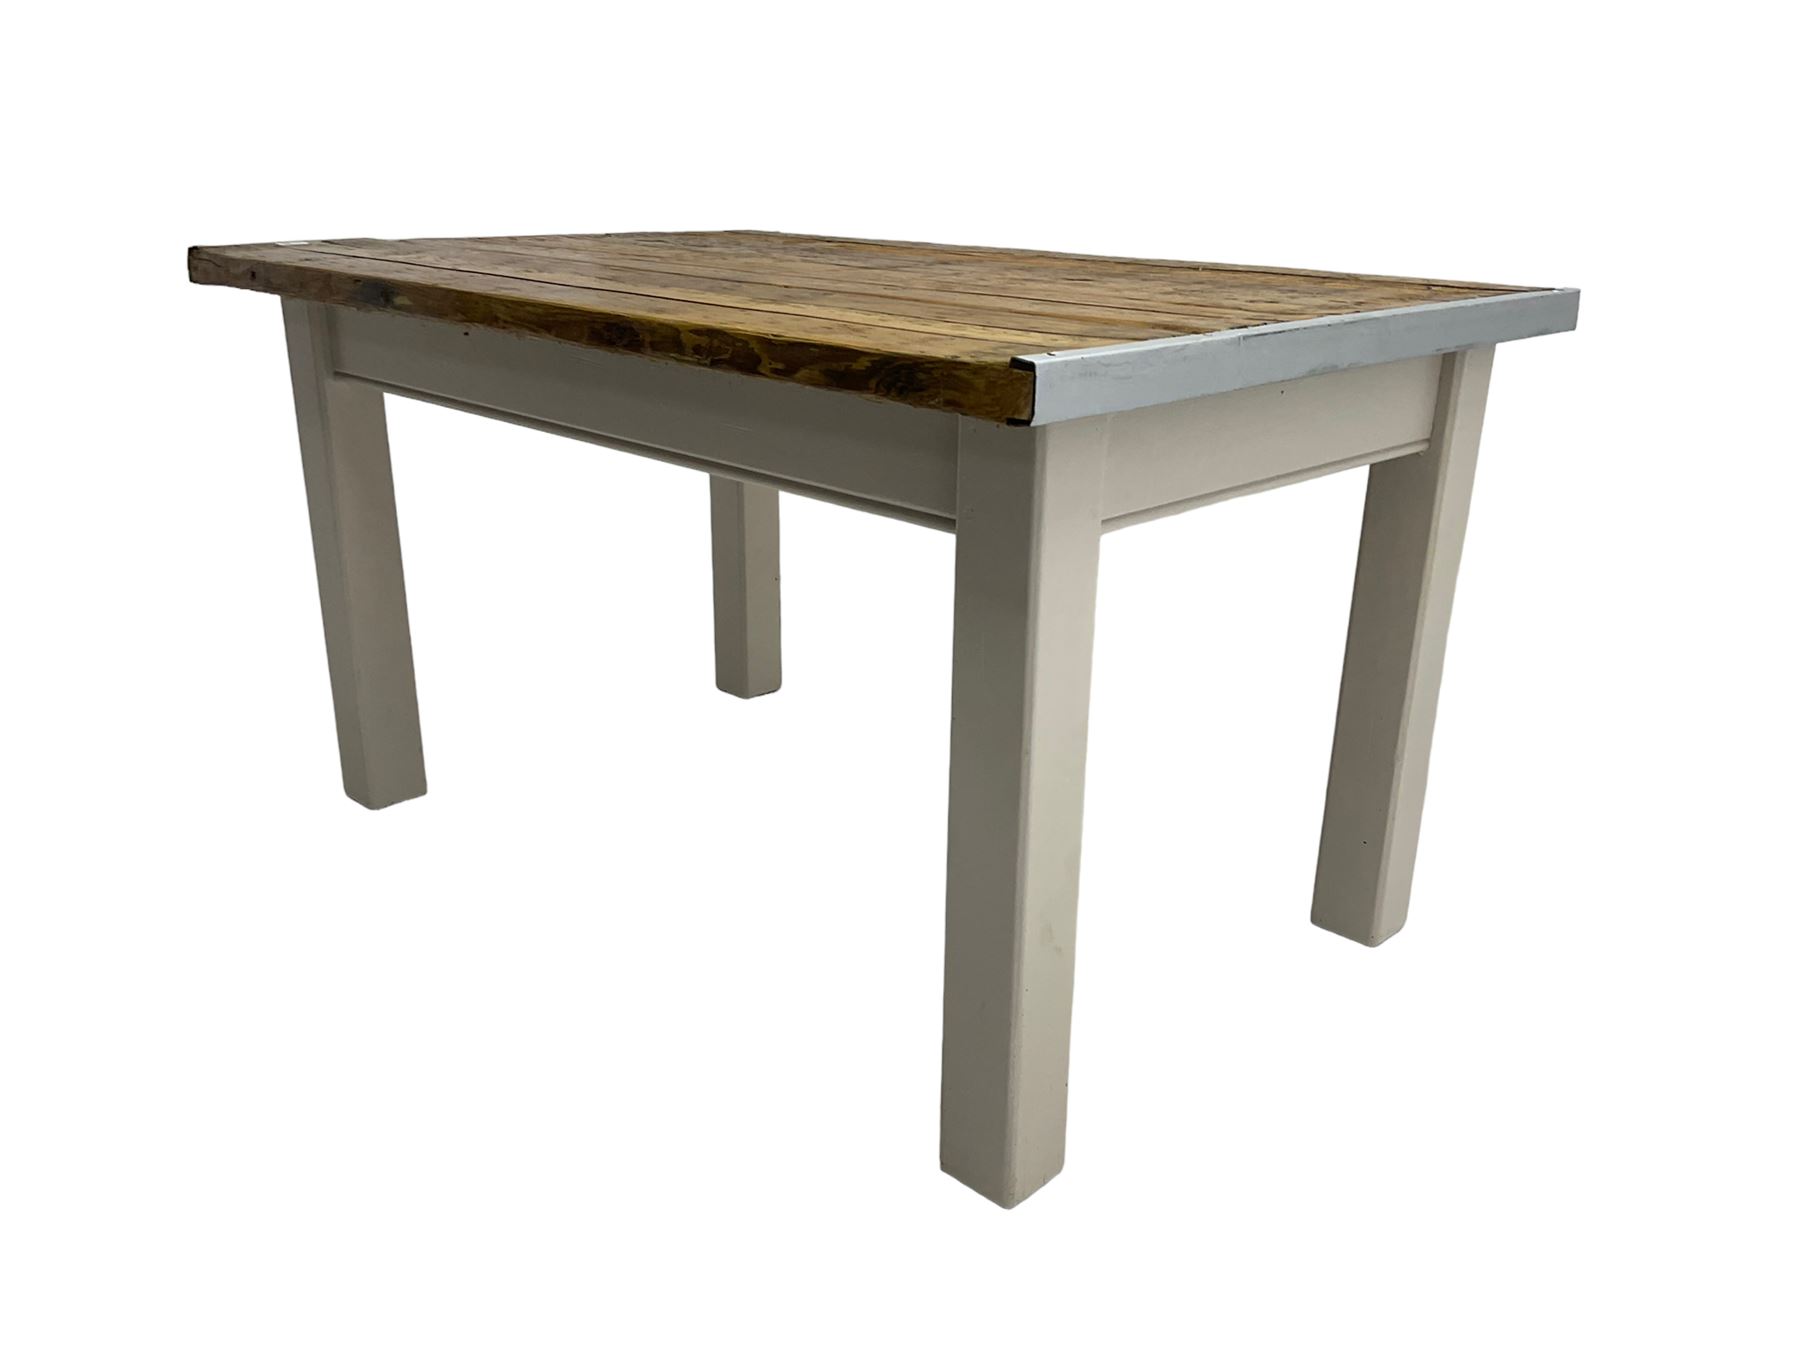 Rustic pine dining table - Image 5 of 6